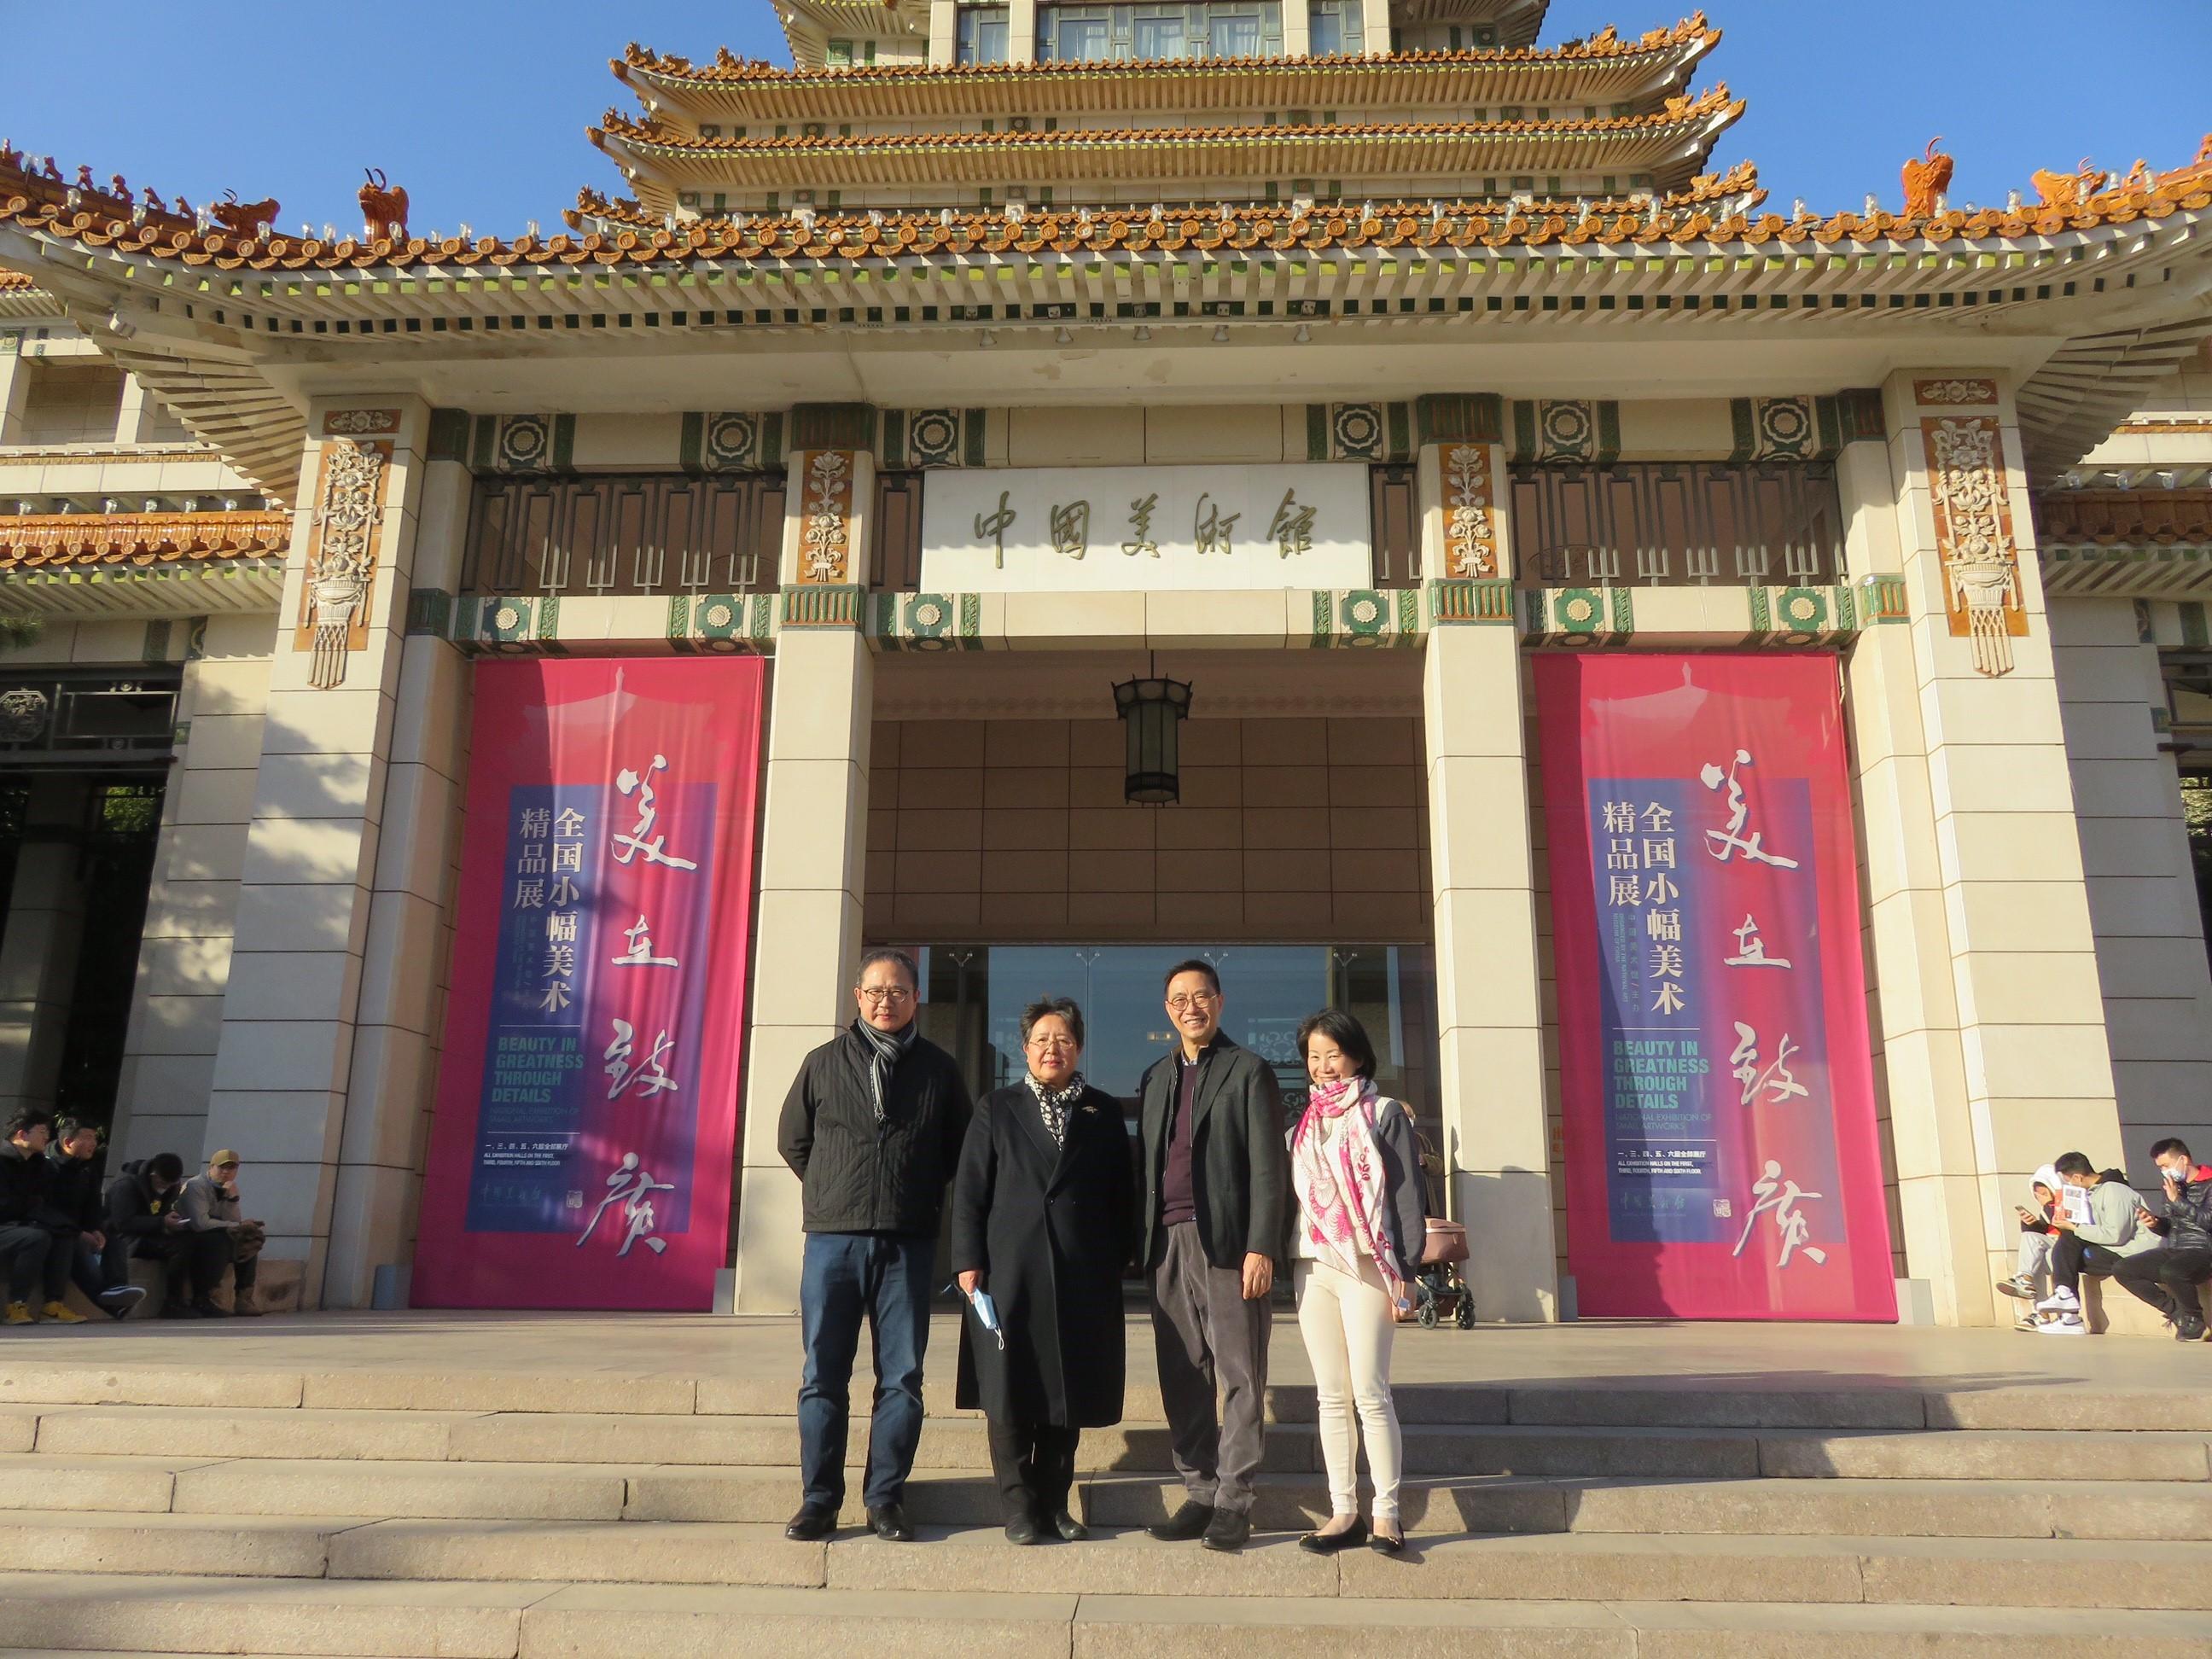 The Secretary for Culture, Sports and Tourism, Mr Kevin Yeung (second right), yesterday (February 19) visited the National Art Museum of China in Beijing. Photo shows the Permanent Secretary for Culture, Sports and Tourism, Mr Joe Wong (first left); the Commissioner for Tourism, Ms Vivian Sum (first right); and Deputy Director of the National Art Museum of China Ms An Yuanyuan (second left).